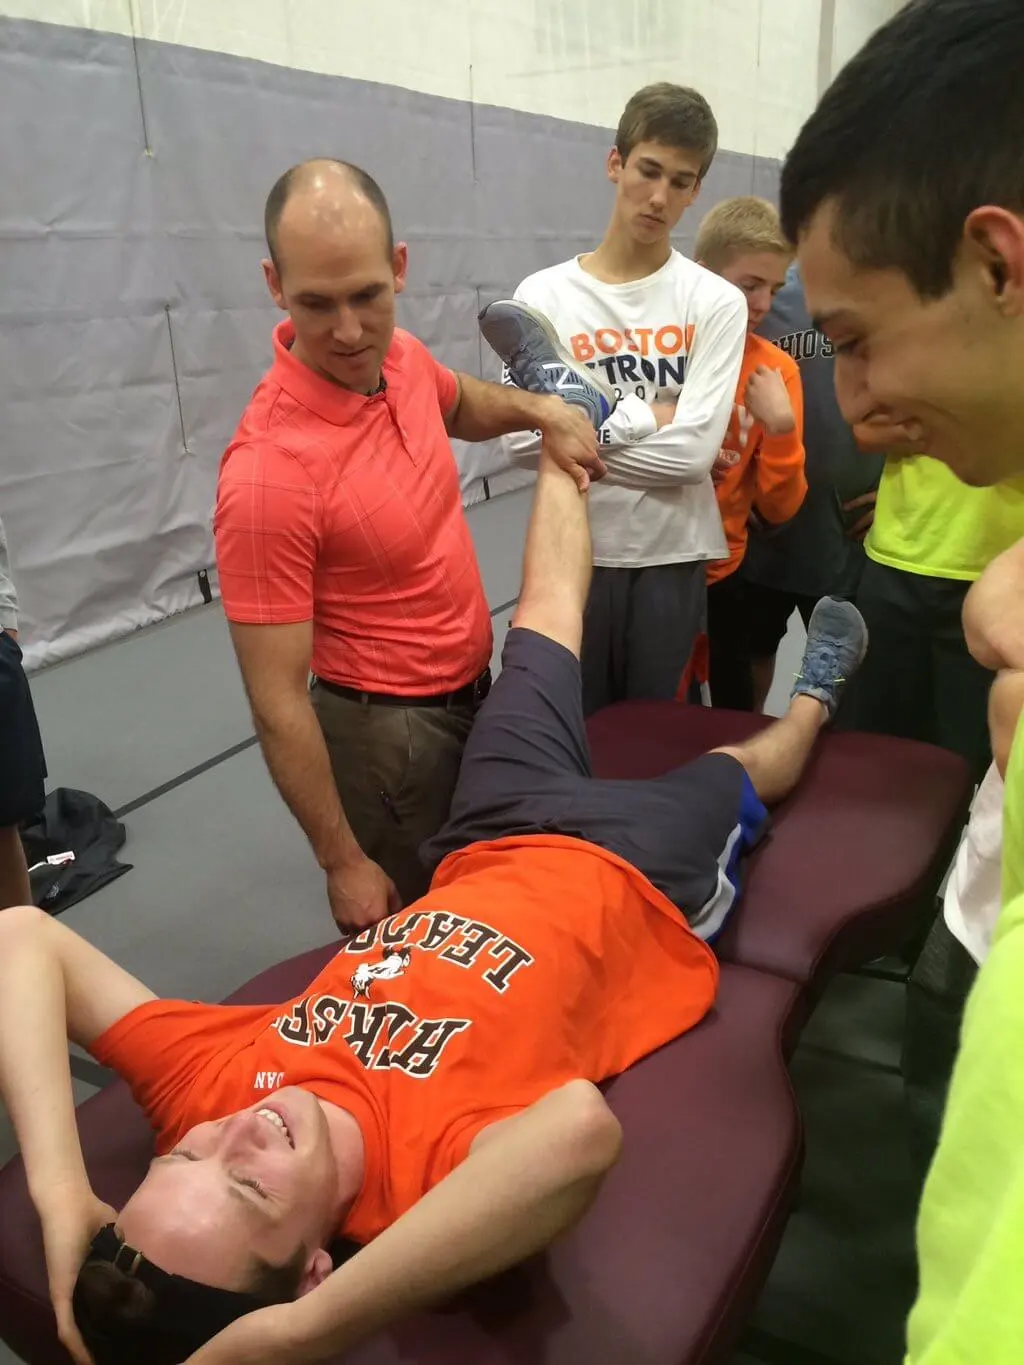 Dr. Nate Porcher performing chiropractic treatment at a shcool